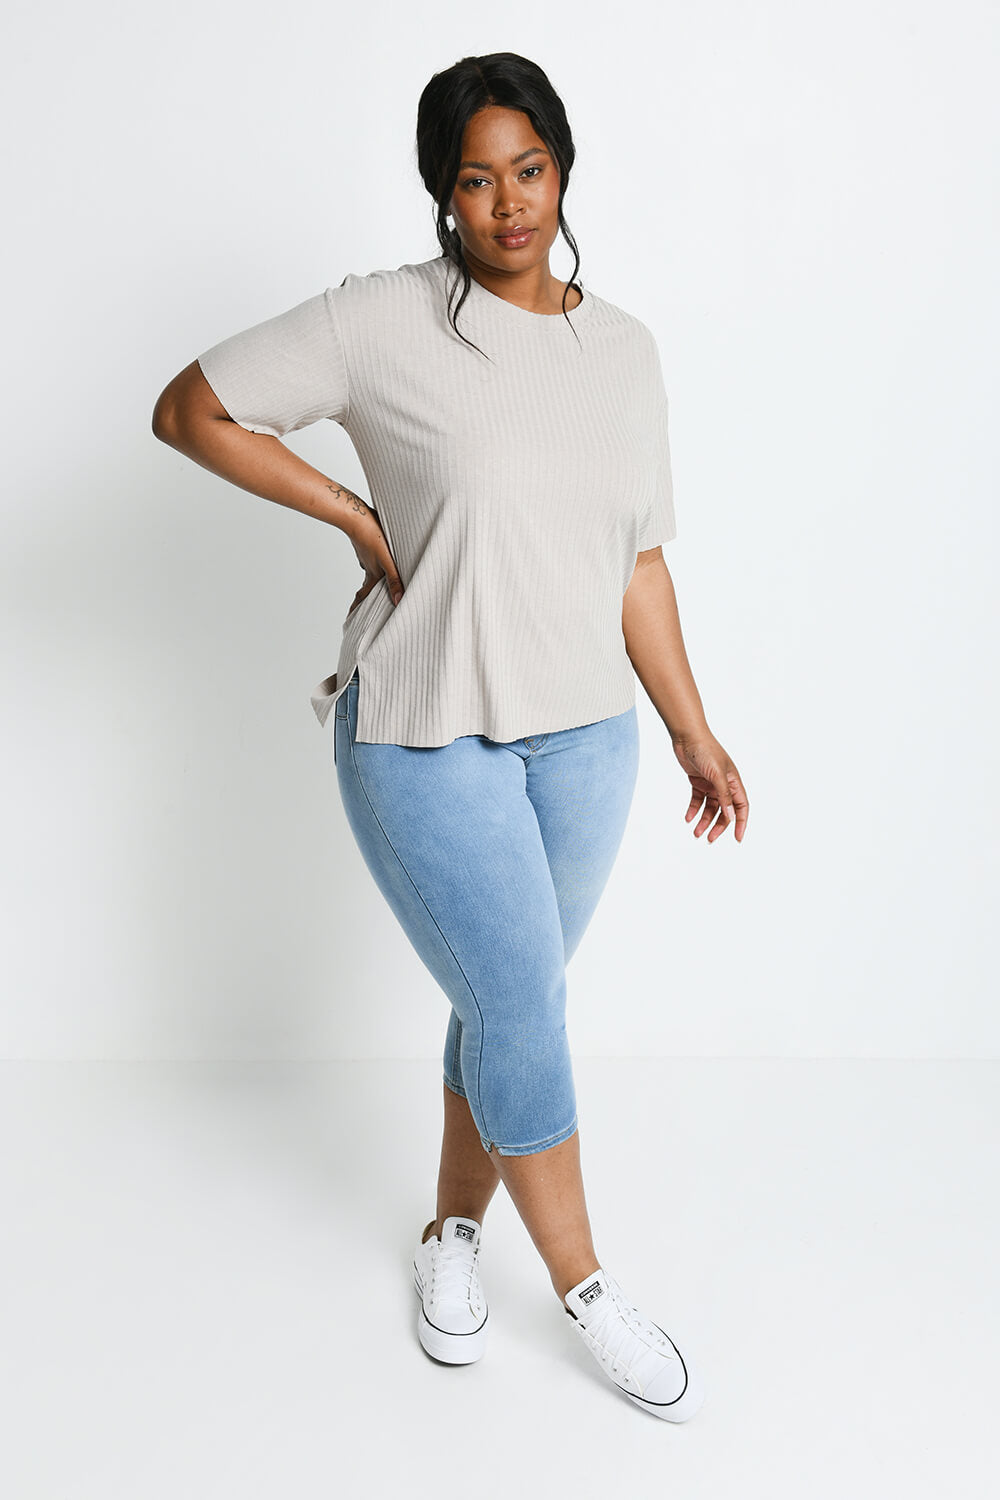 Plus Size Black Cropped Jeggings